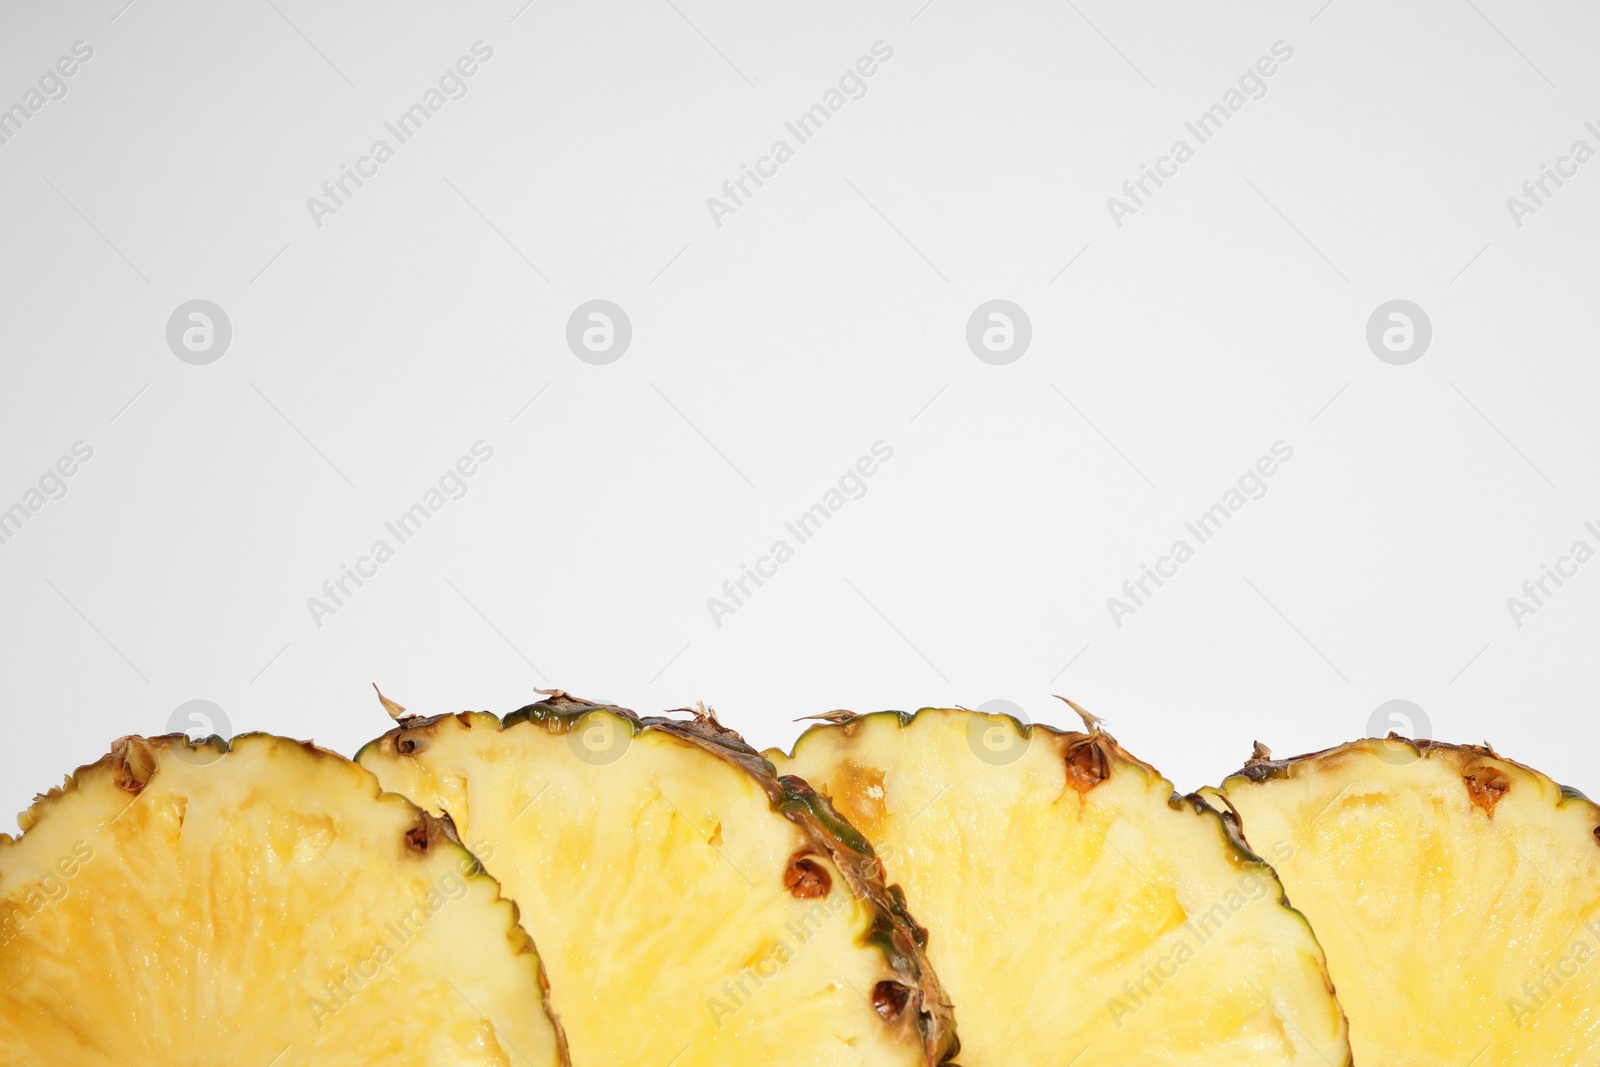 Photo of Slices of tasty ripe pineapple on white background, flat lay. Space for text